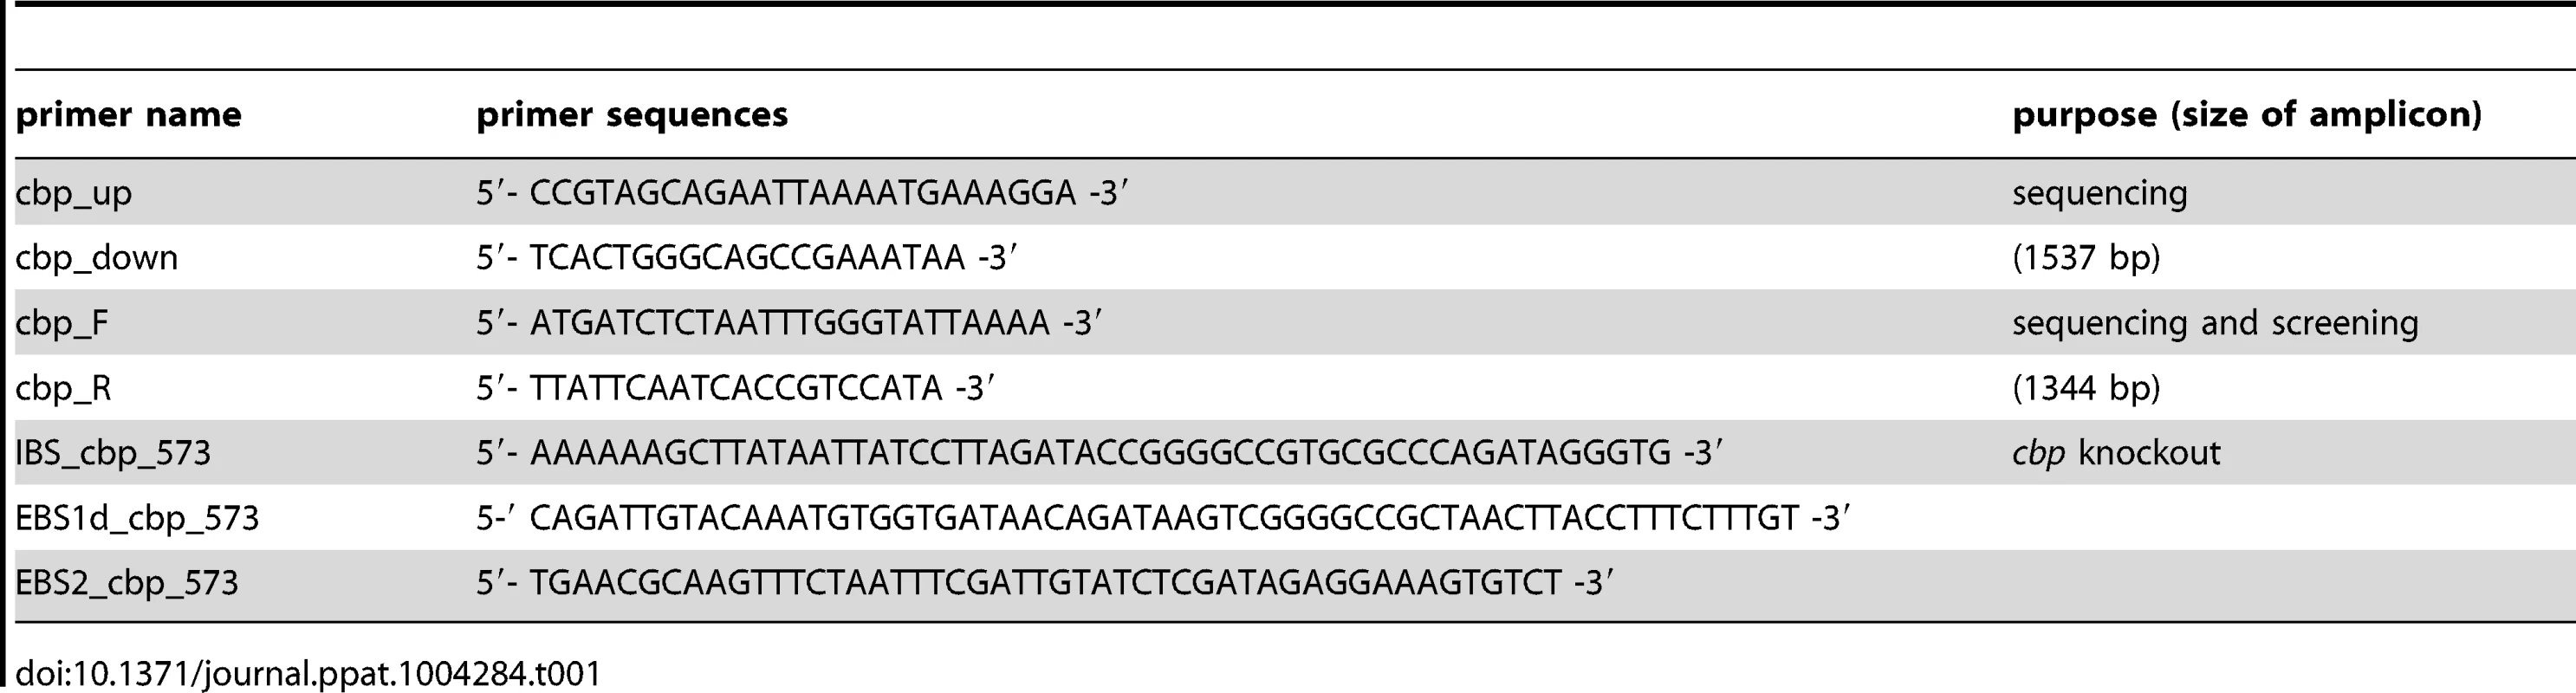 Primers used for sequence analysis of &lt;i&gt;cbp&lt;/i&gt;49, screening of &lt;i&gt;P. larvae&lt;/i&gt; isolates for &lt;i&gt;cbp&lt;/i&gt;49, and construction of gene knockouts in &lt;i&gt;P. larvae&lt;/i&gt; ATCC9545 (ERIC I) and DSM25430 (ERIC II).